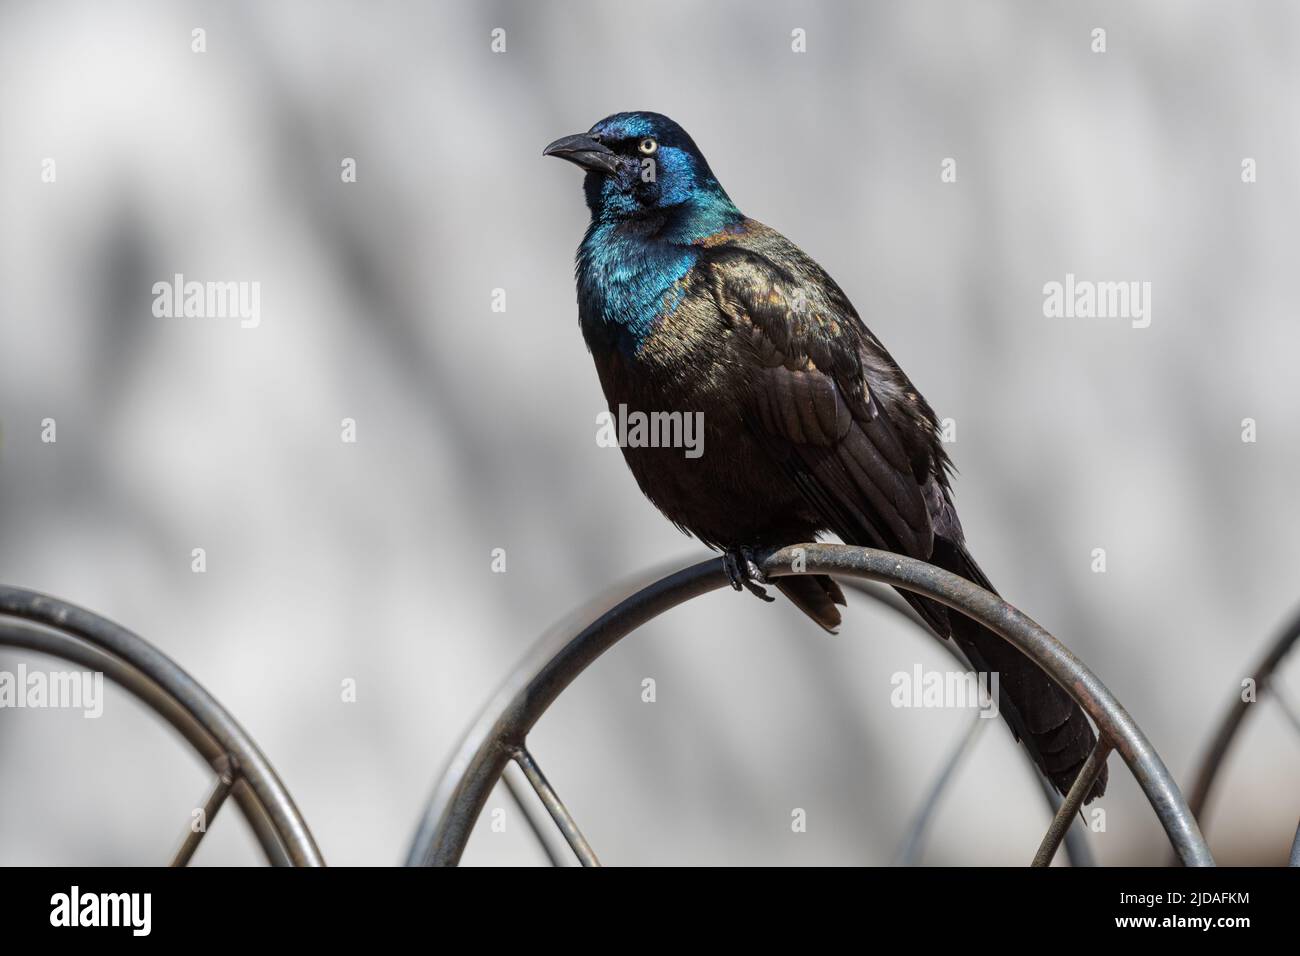 Common Grackle (Quiscalus quiscula) perched on a metal fence Stock Photo